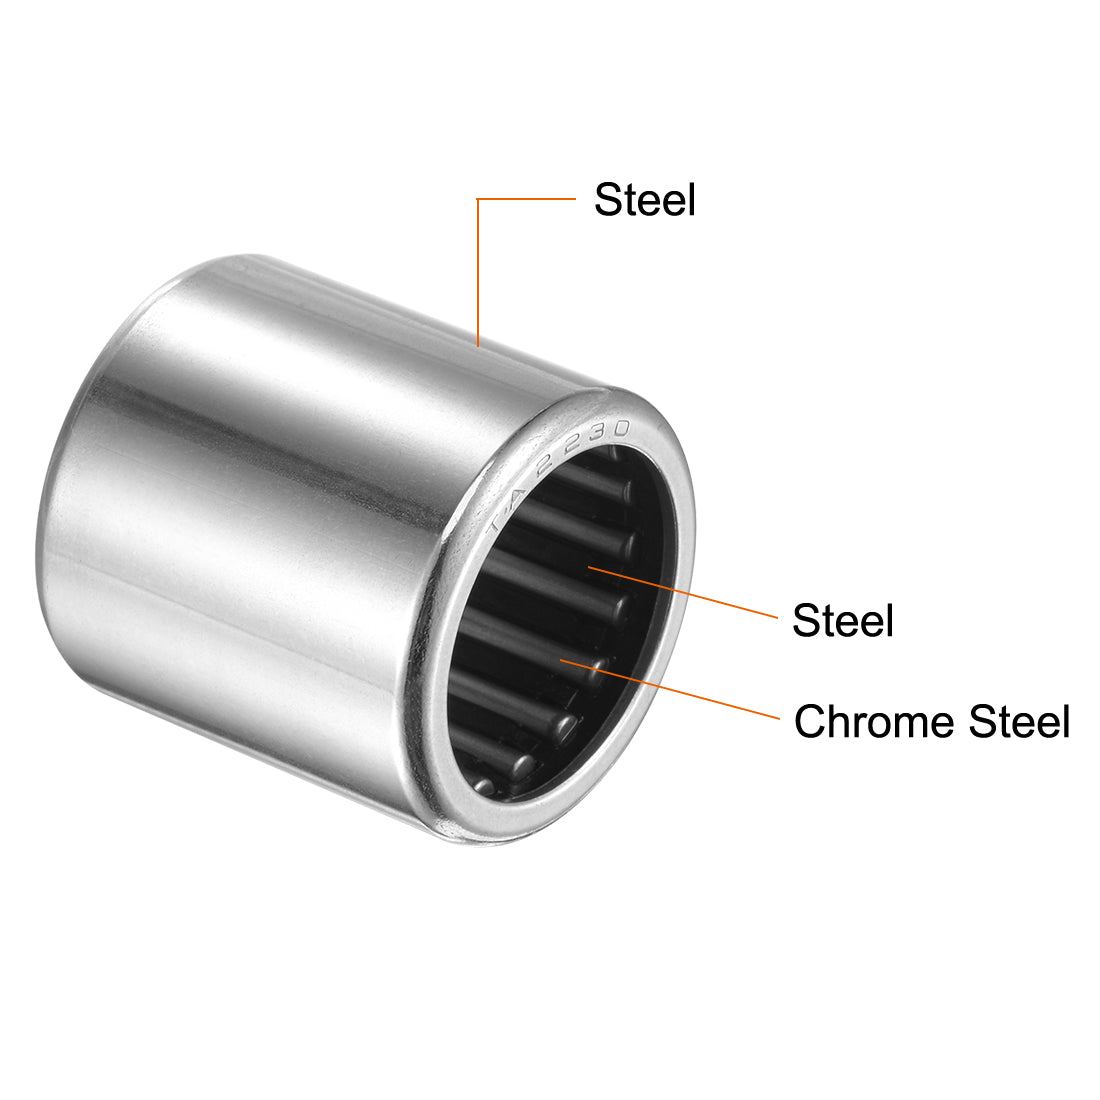 uxcell Uxcell TA2030 Needle Roller Bearings 20mm x 27mm x 30mm Chrome Steel Open End 2pcs